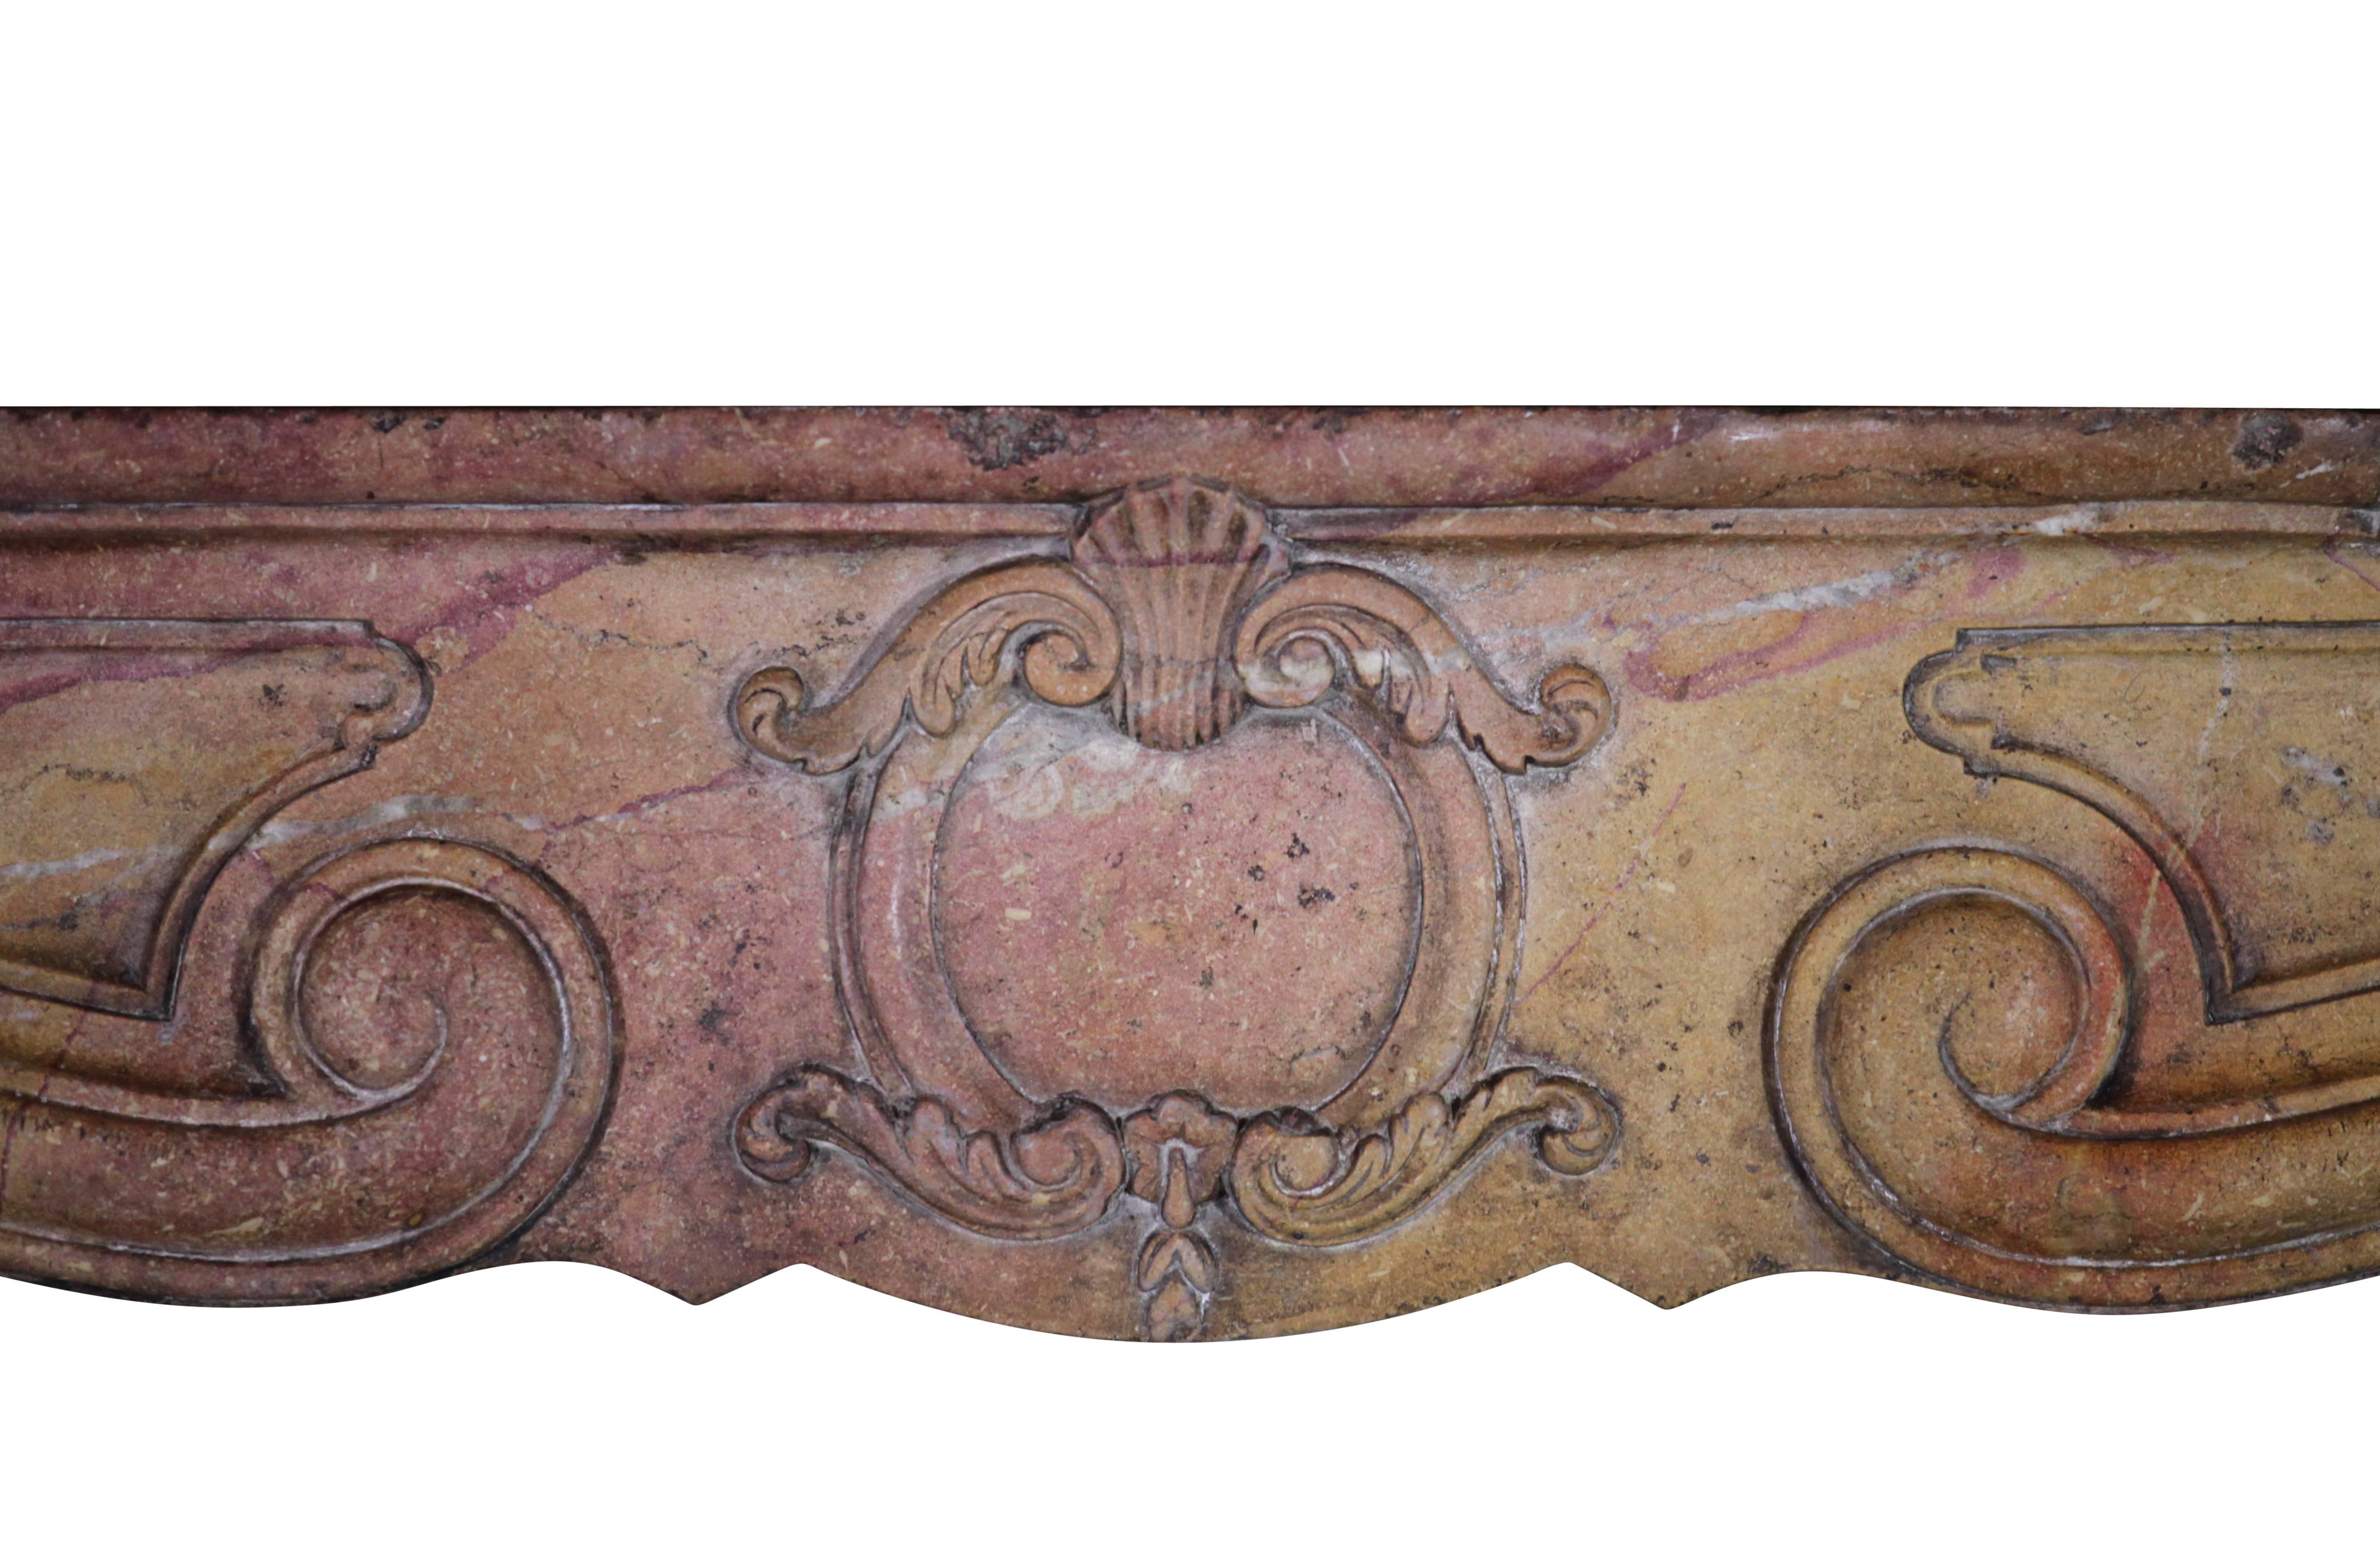 Phenomenal bicolor burgundy hard stone mantle can be waxed to bring the deep patina out. It has exceptional proportions and is in perfect condition. The mantle is from the vineyards of Burgundy, France. A eyecatcher in any interior. From regency to